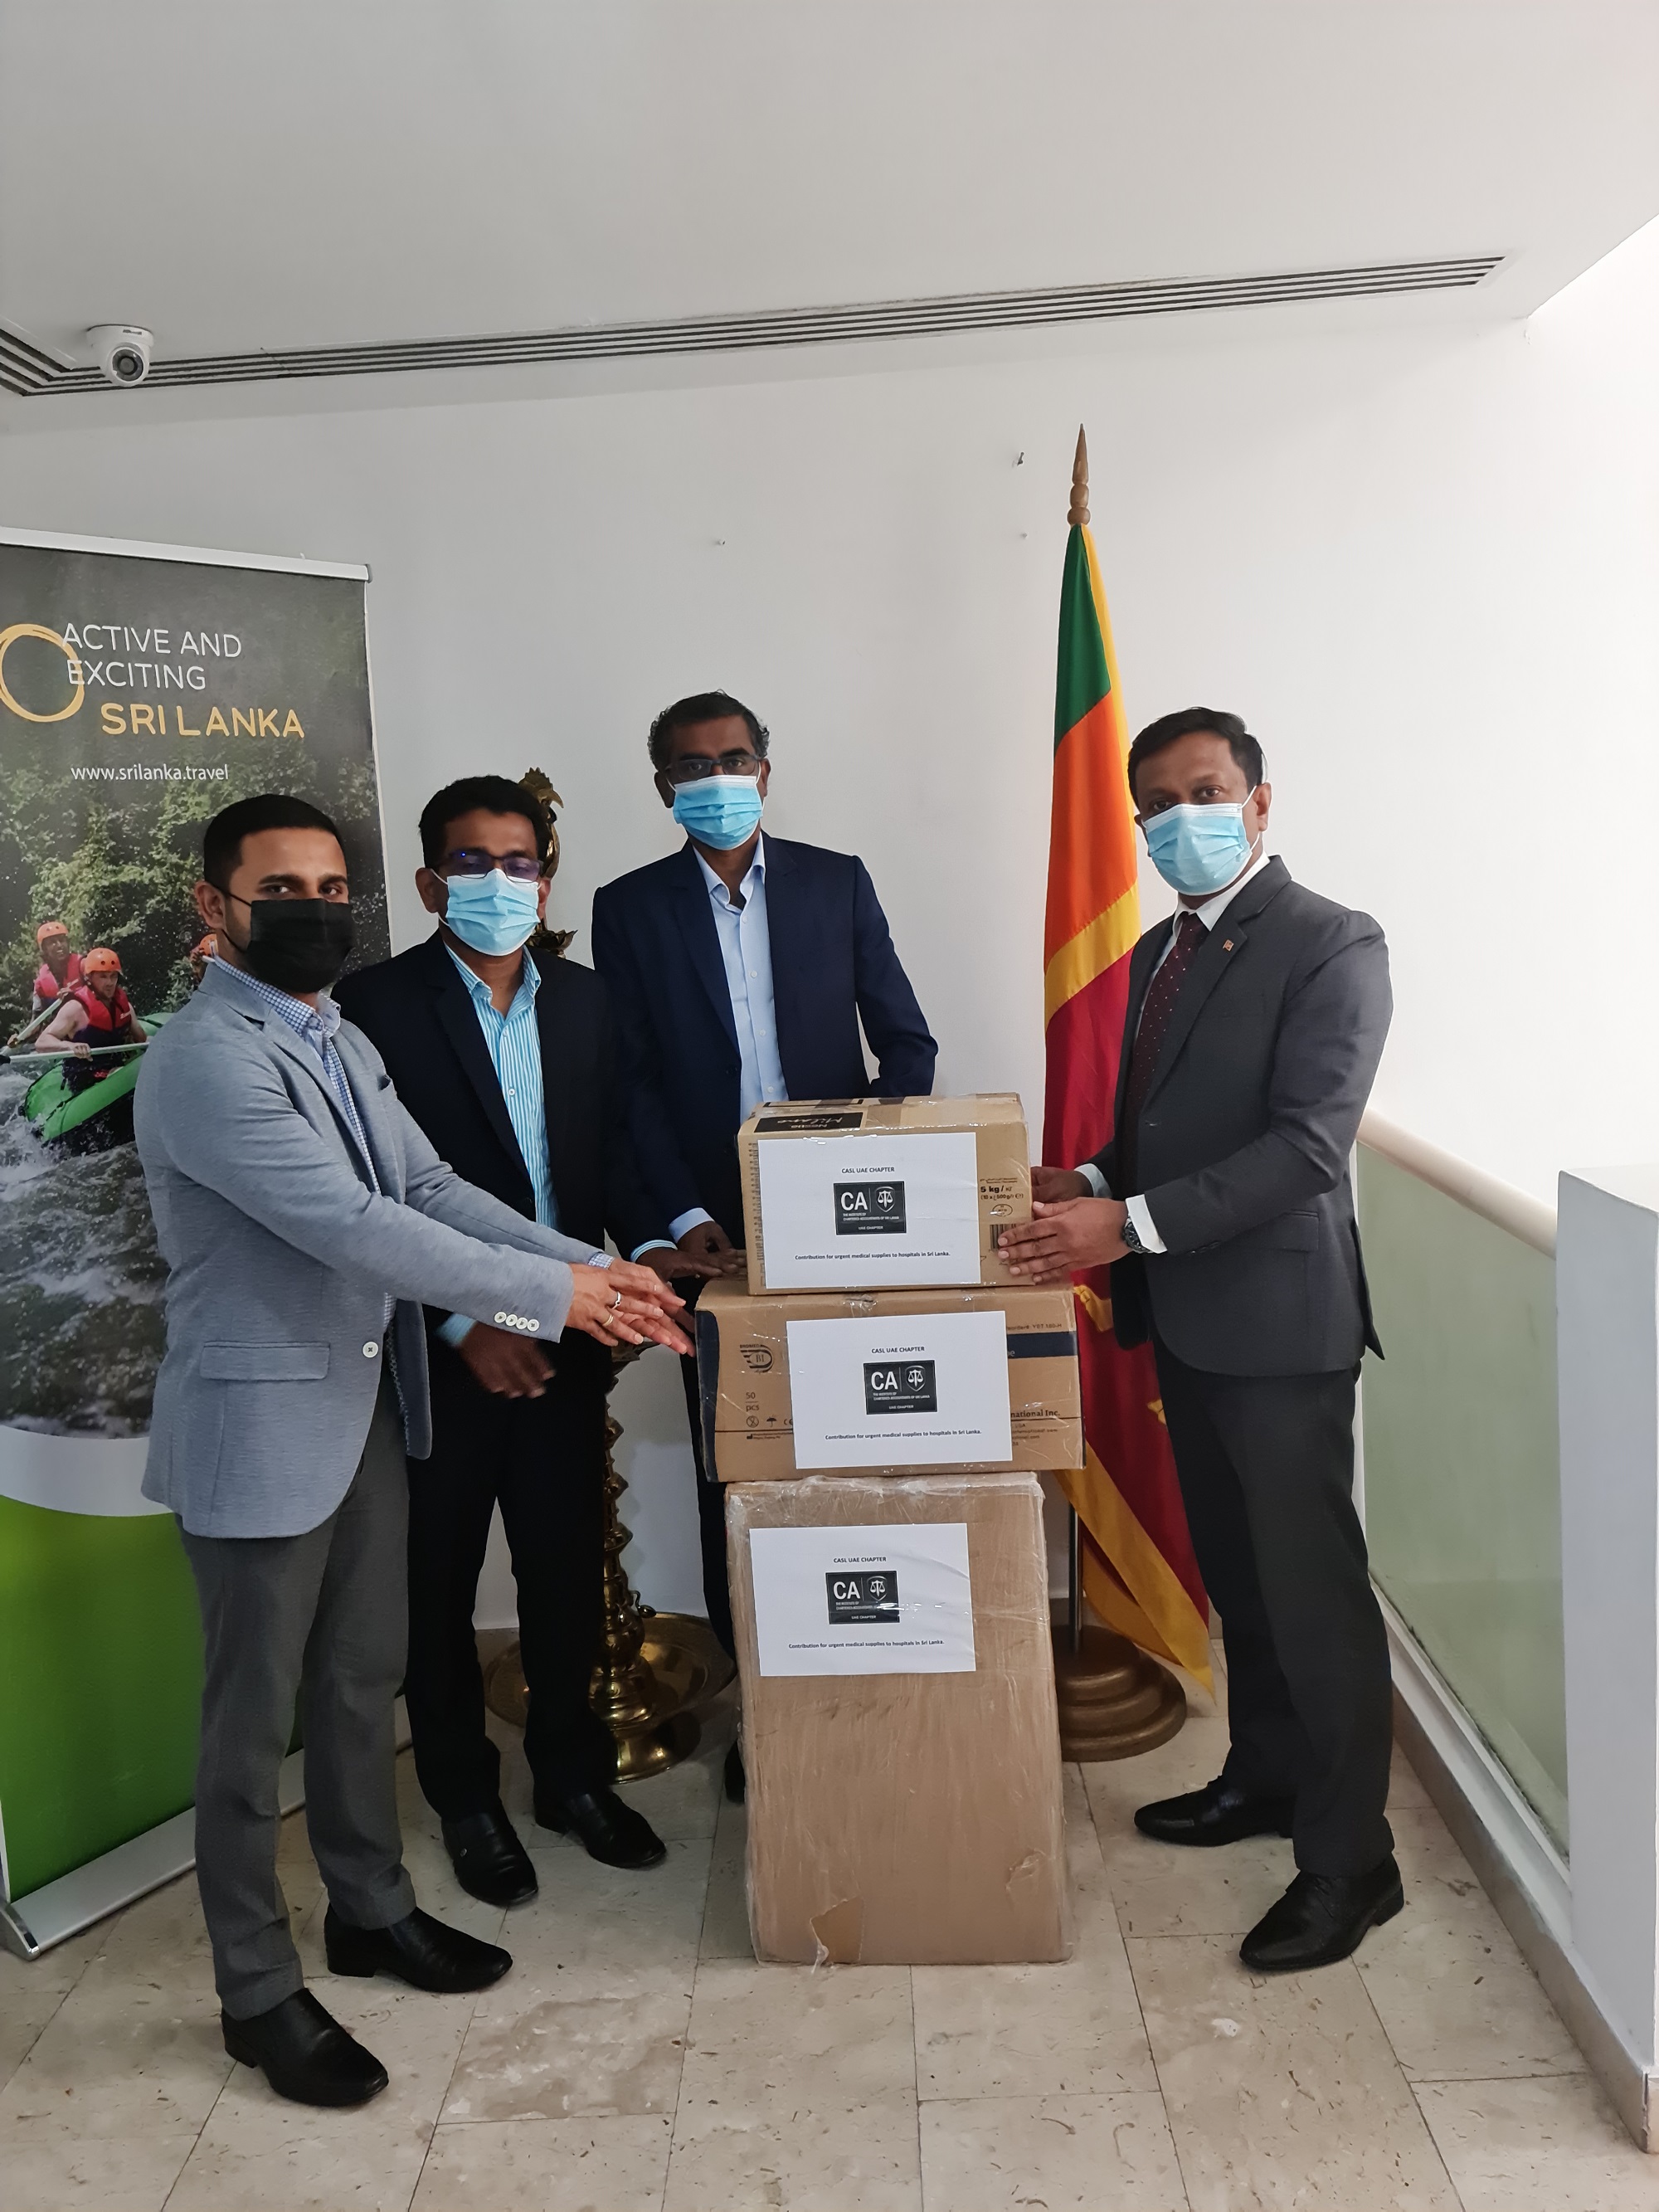 The consignment of medical supplies being handed over to the Consul General of Sri Lanka to Dubai and Northern Emirates by President of the CA Sri Lanka UAE Chapter Mr. Sajeep Kalinga, in the presence of Mr. S. Kirusantharaj and Mr. Indika Rathnayake.